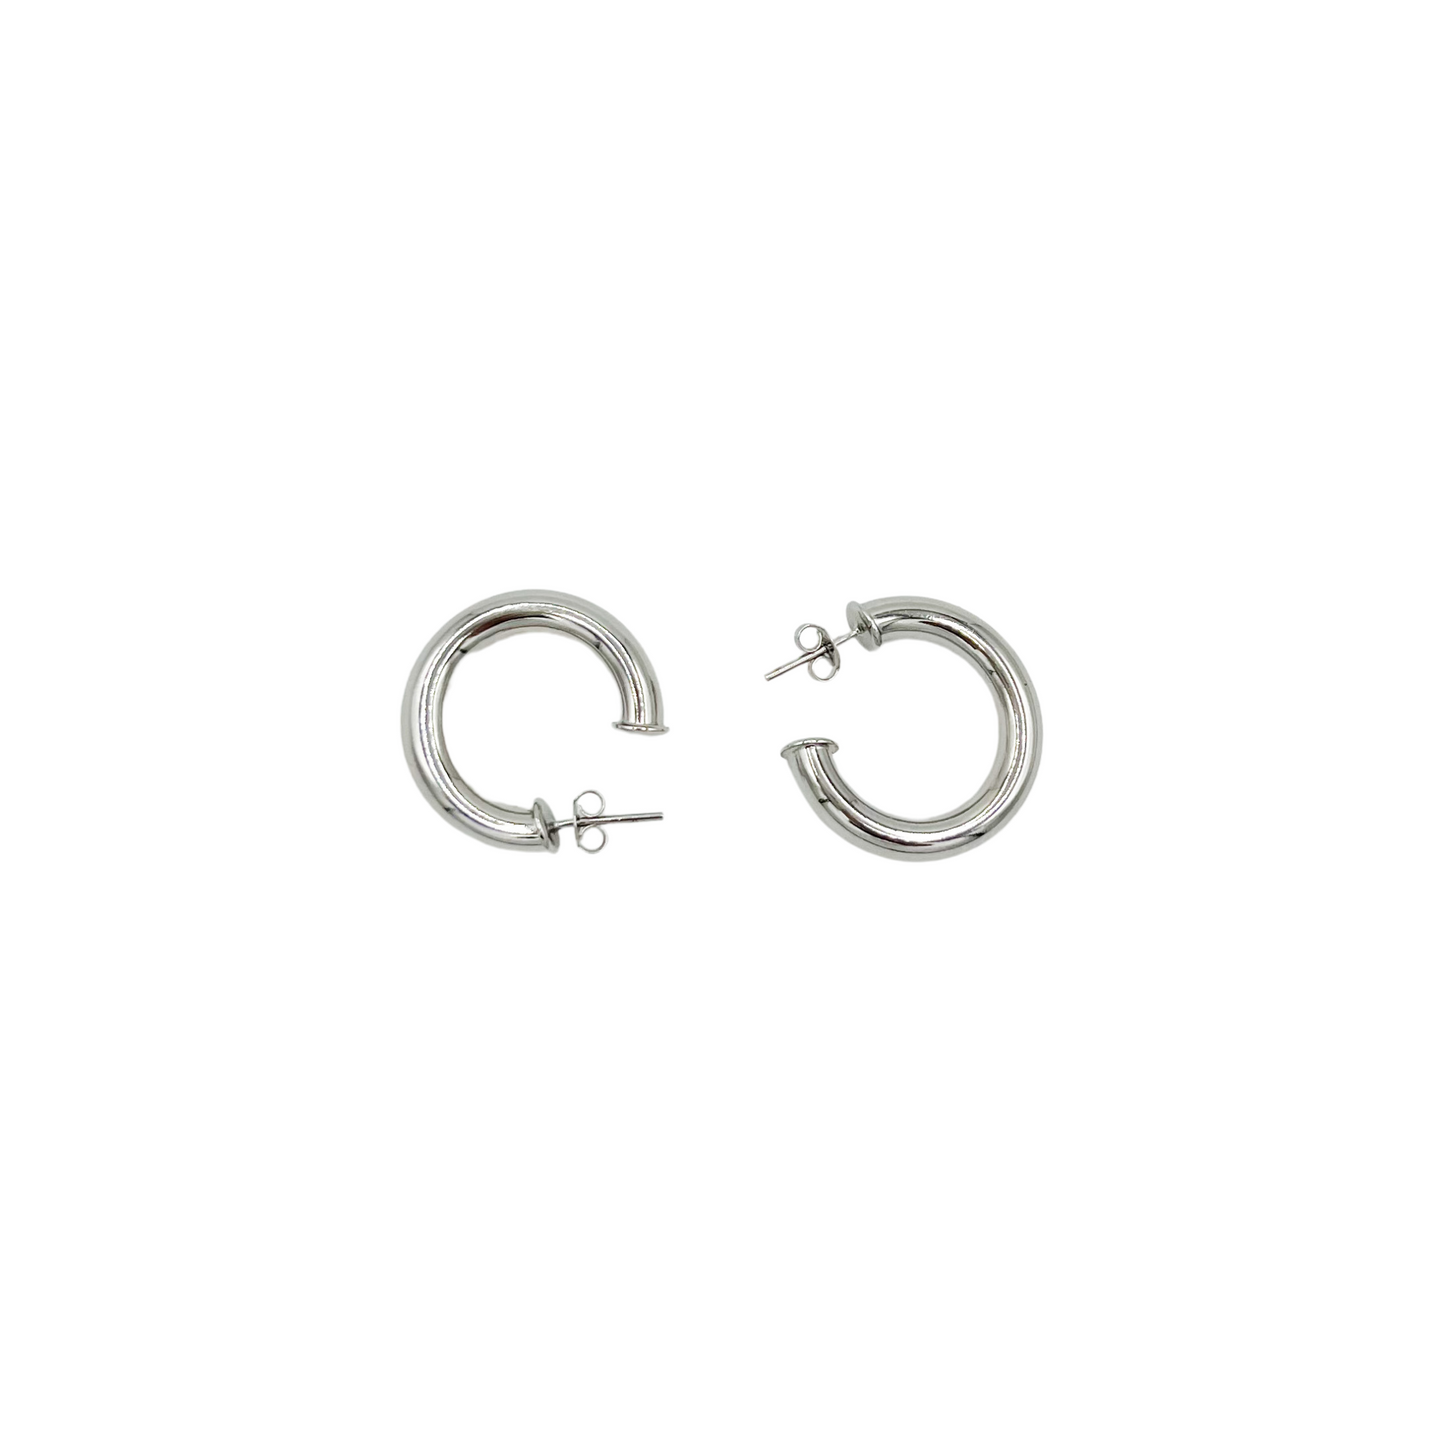 Roop Jewelry chunky hoops. Rhodium-filled chunky hoops. Silver hoops. bipoc jewelry boutique Oakland. South Asian jewelry business.